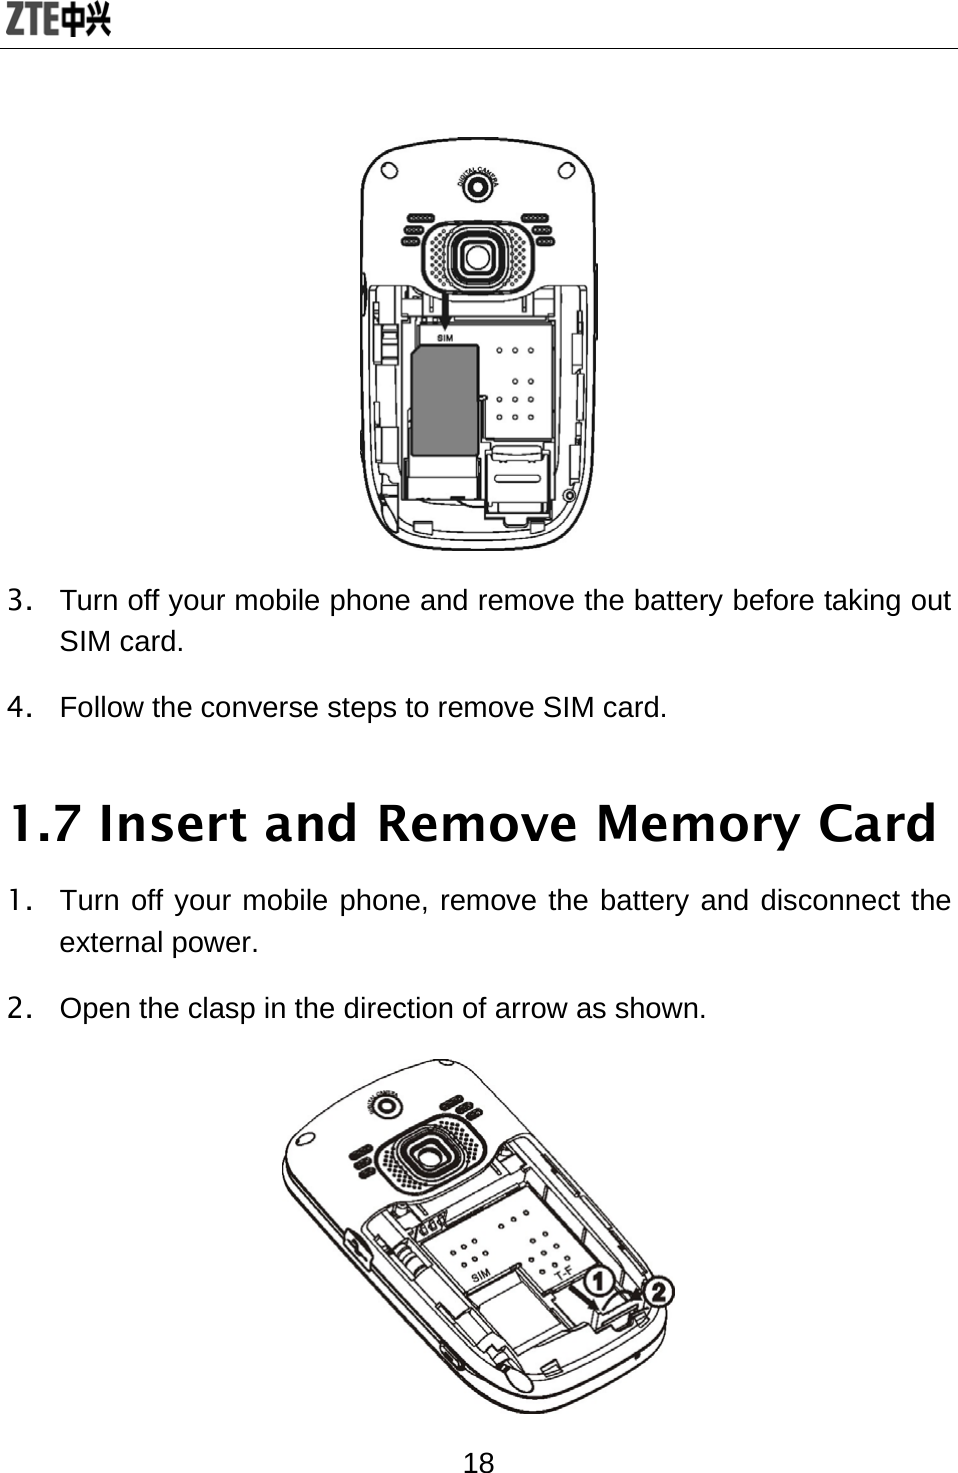  18  3.  Turn off your mobile phone and remove the battery before taking out SIM card. 4.  Follow the converse steps to remove SIM card. 1.7 Insert and Remove Memory Card 1.  Turn off your mobile phone, remove the battery and disconnect the external power. 2.  Open the clasp in the direction of arrow as shown.  